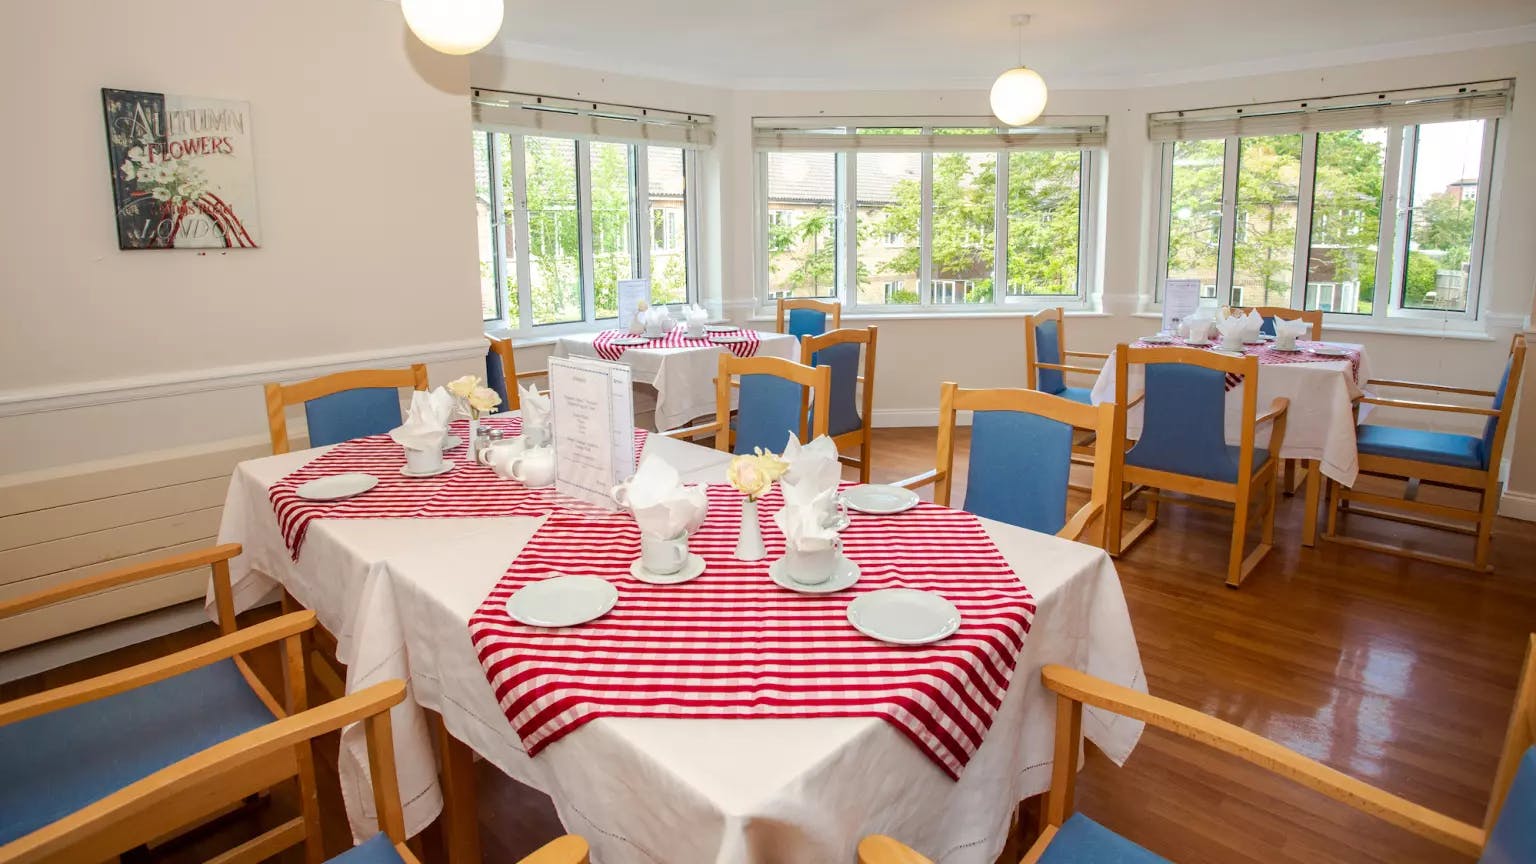 Dining area of Vesta Lodge care home in St Albans, Hertfordshire